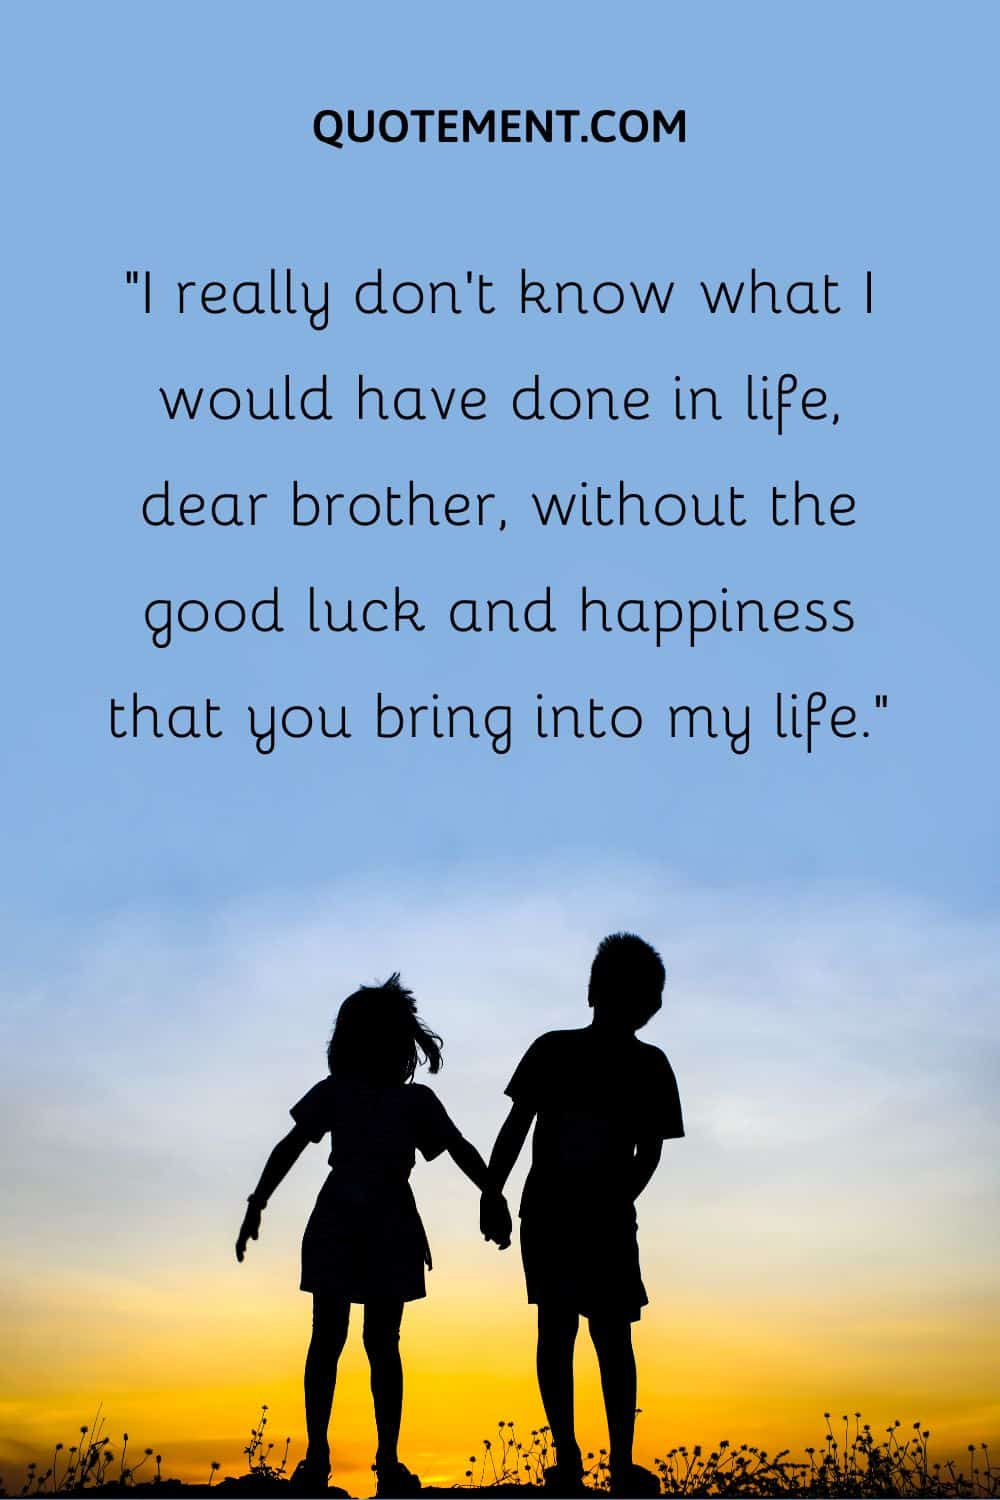 “I really don’t know what I would have done in life, dear brother, without the good luck and happiness that you bring into my life.”